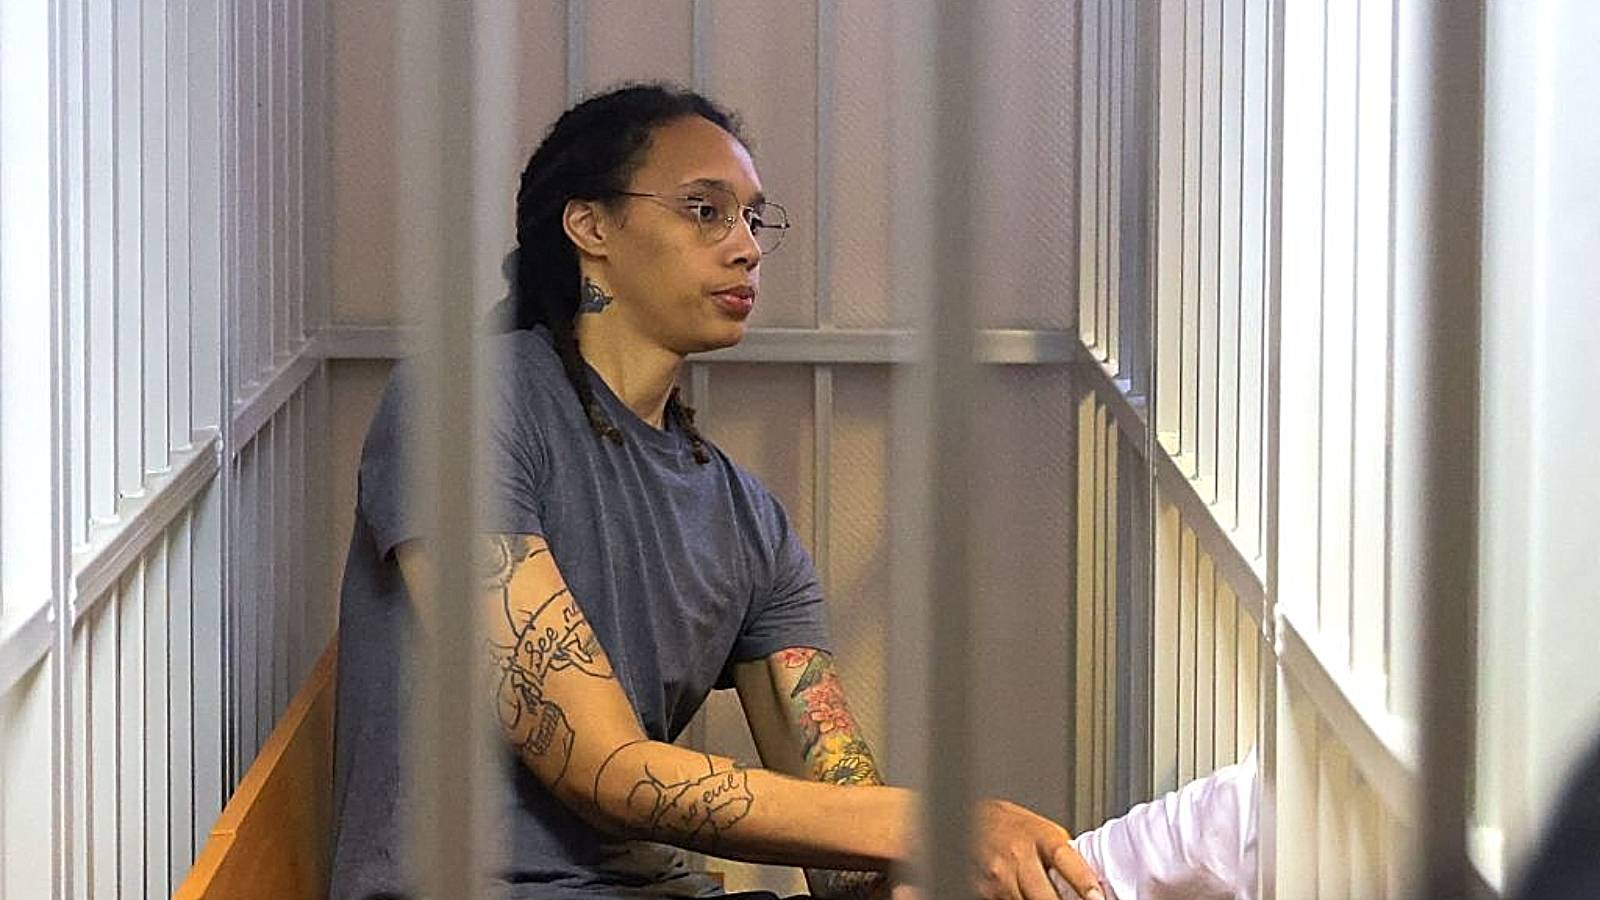 US Women's National Basketball Association (WNBA) basketball player Brittney Griner, who was detained at Moscow's Sheremetyevo airport and later charged with illegal possession of cannabis, sits inside a defendants' cage after the court's verdict during a hearing in Khimki outside Moscow, on August 4, 2022. - A Russian court found Griner guilty of smuggling and storing narcotics after prosecutors requested a sentence of nine and a half years in jail for the athlete 